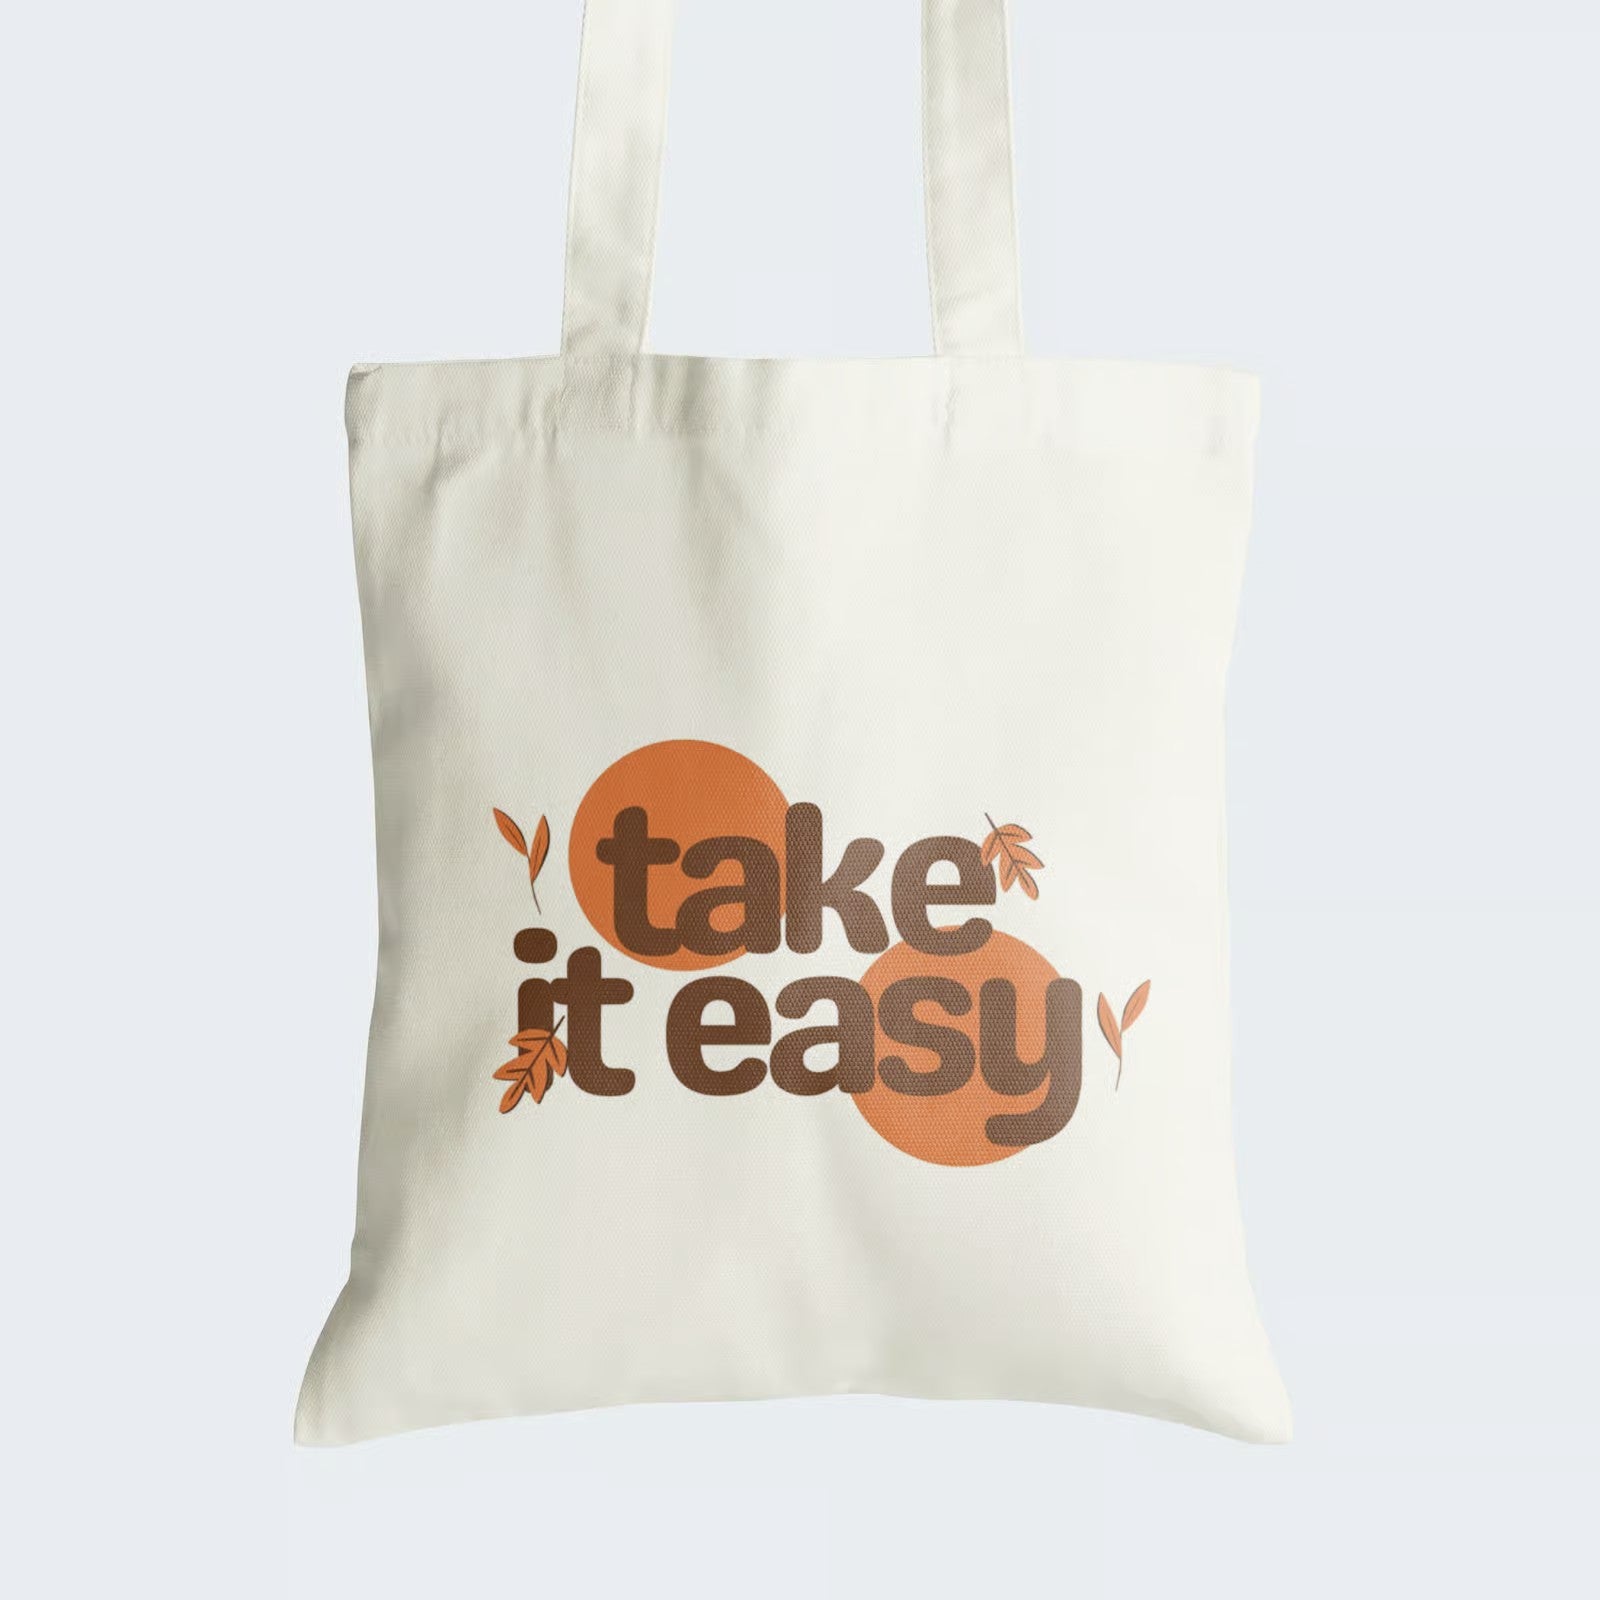 Elevate your style and find tranquility with our "Take It Easy" Cotton Canvas Tote Bag. This tote features a calming graphic text message, "Take It Easy," surrounded by graceful autumn leaves, evoking the serene beauty of the season. Crafted for both durability and style, it includes a secure zipper closure for daily convenience. Carry the message of relaxation and embrace autumn's serenity with our stylish Cotton Canvas Tote Bag. Order yours today!